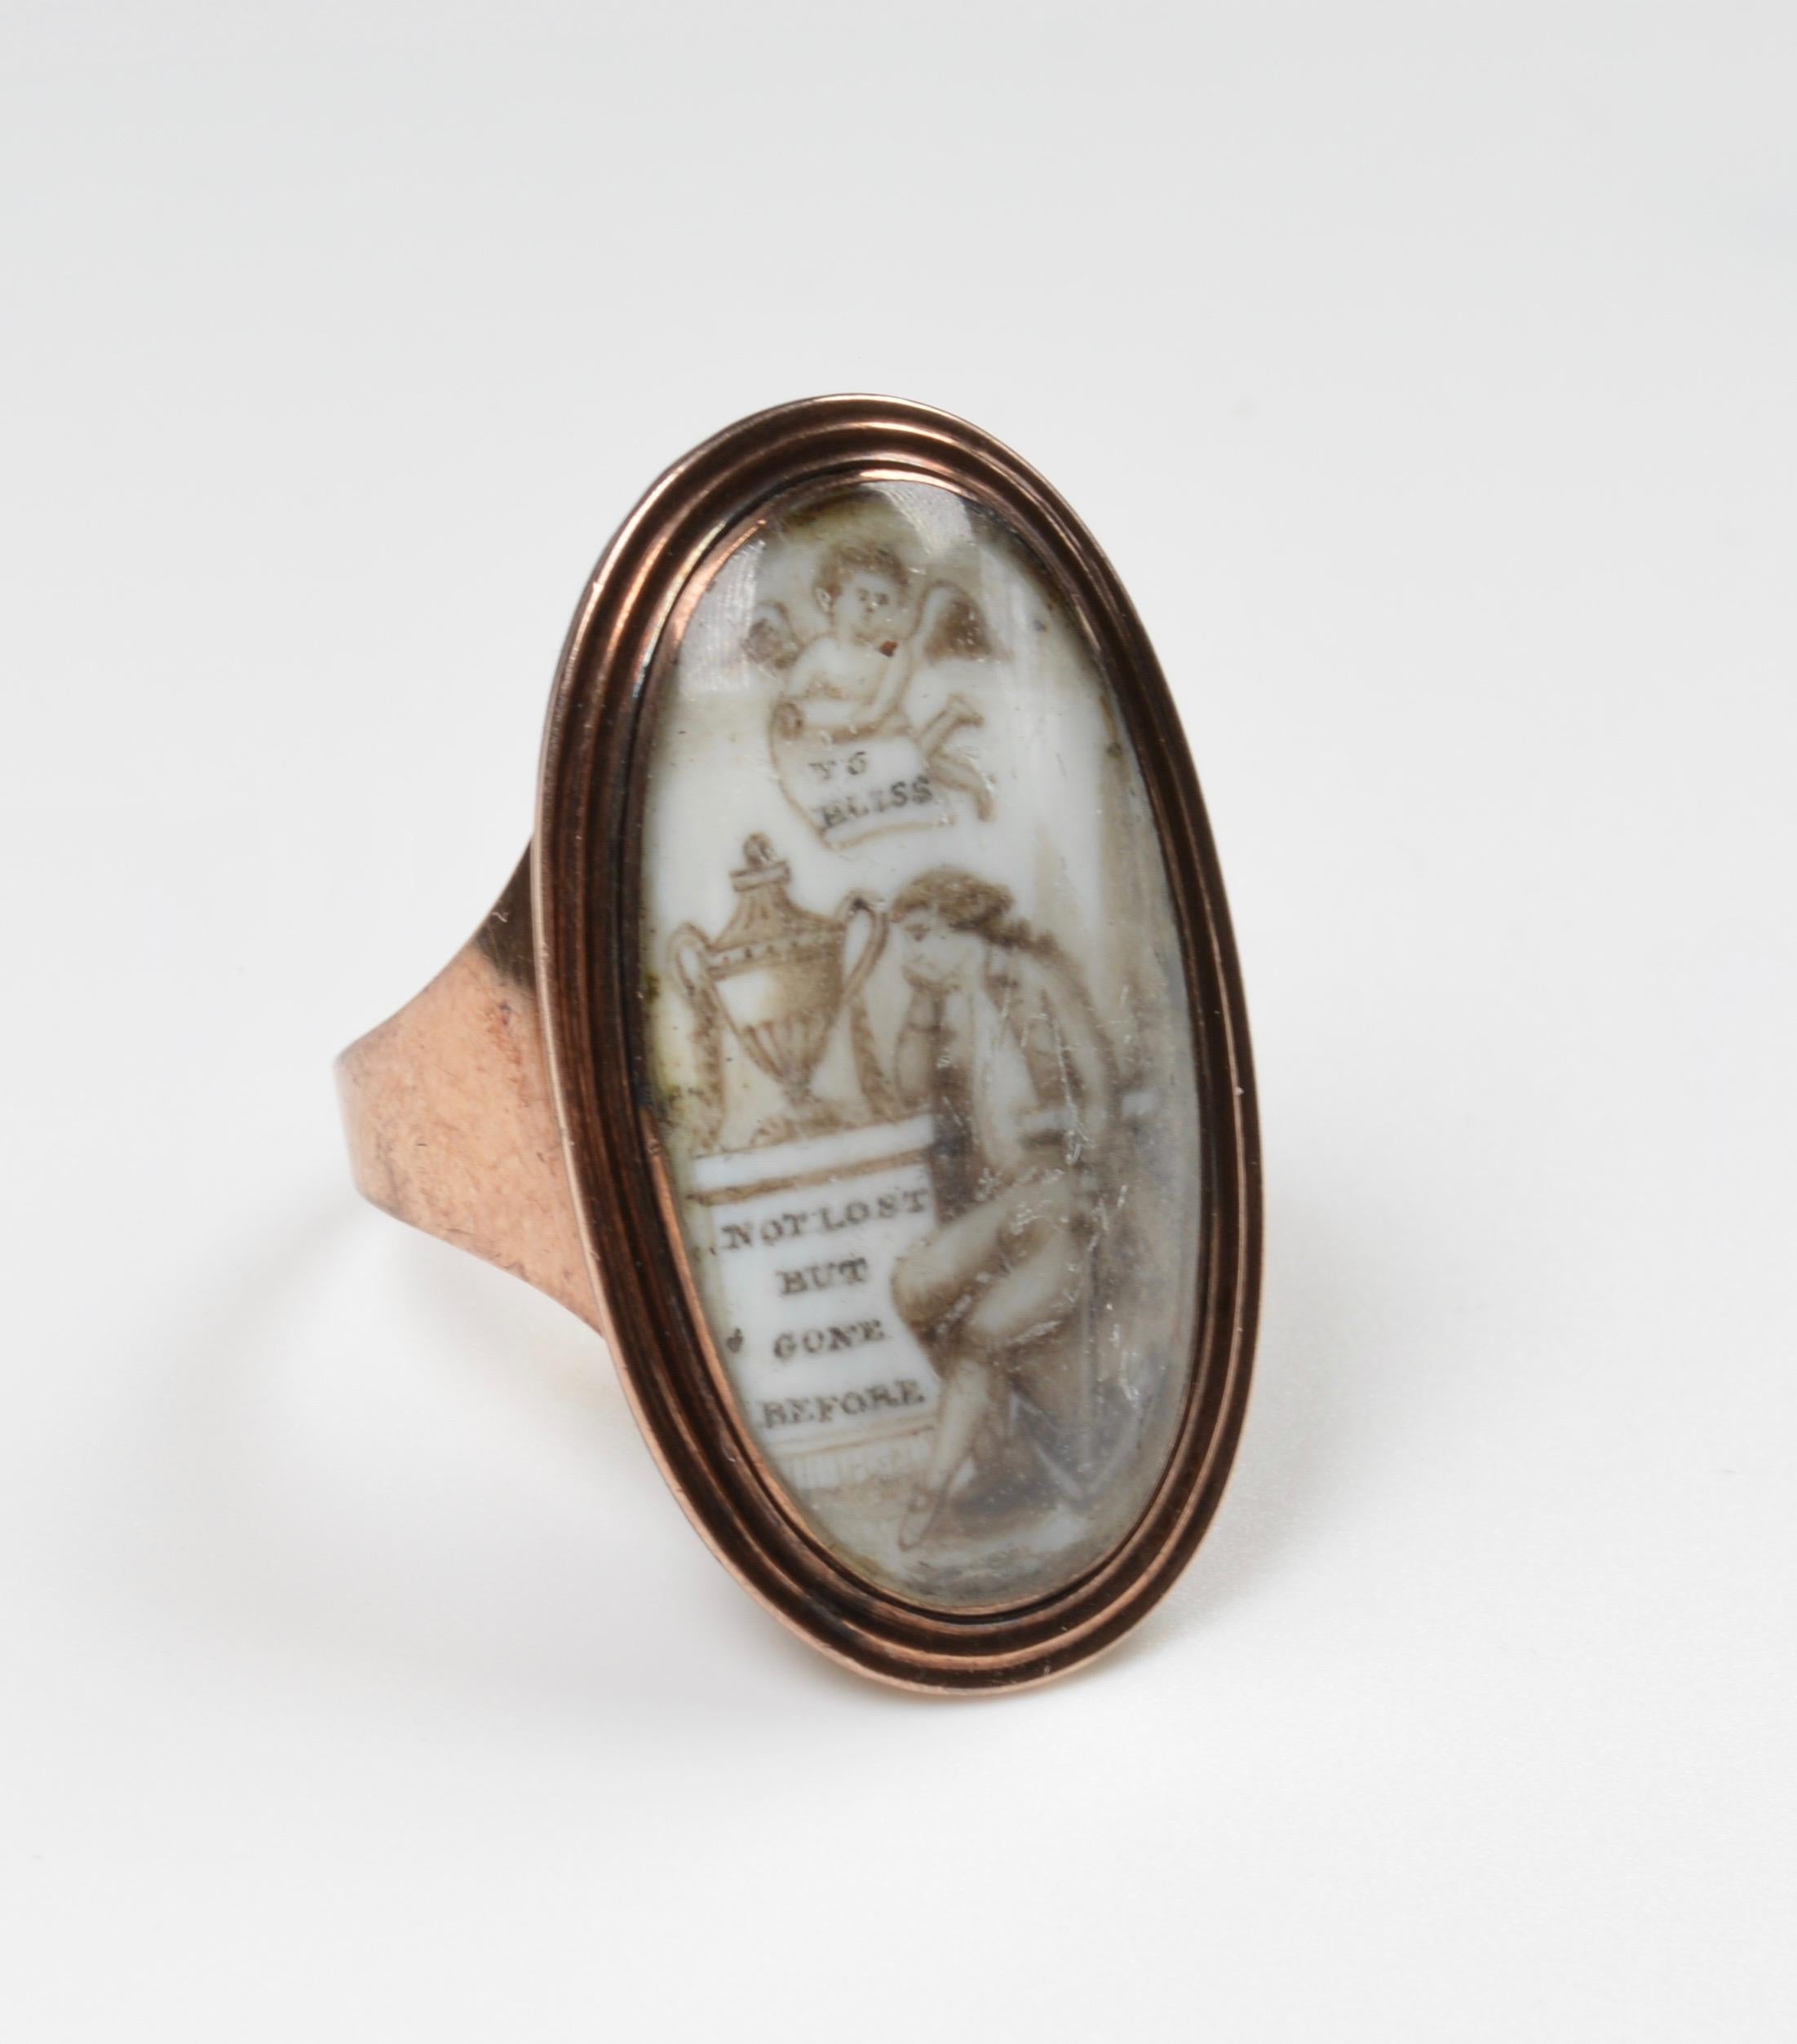 Regency Late 18th Century Gold and Enamel Mourning Ring